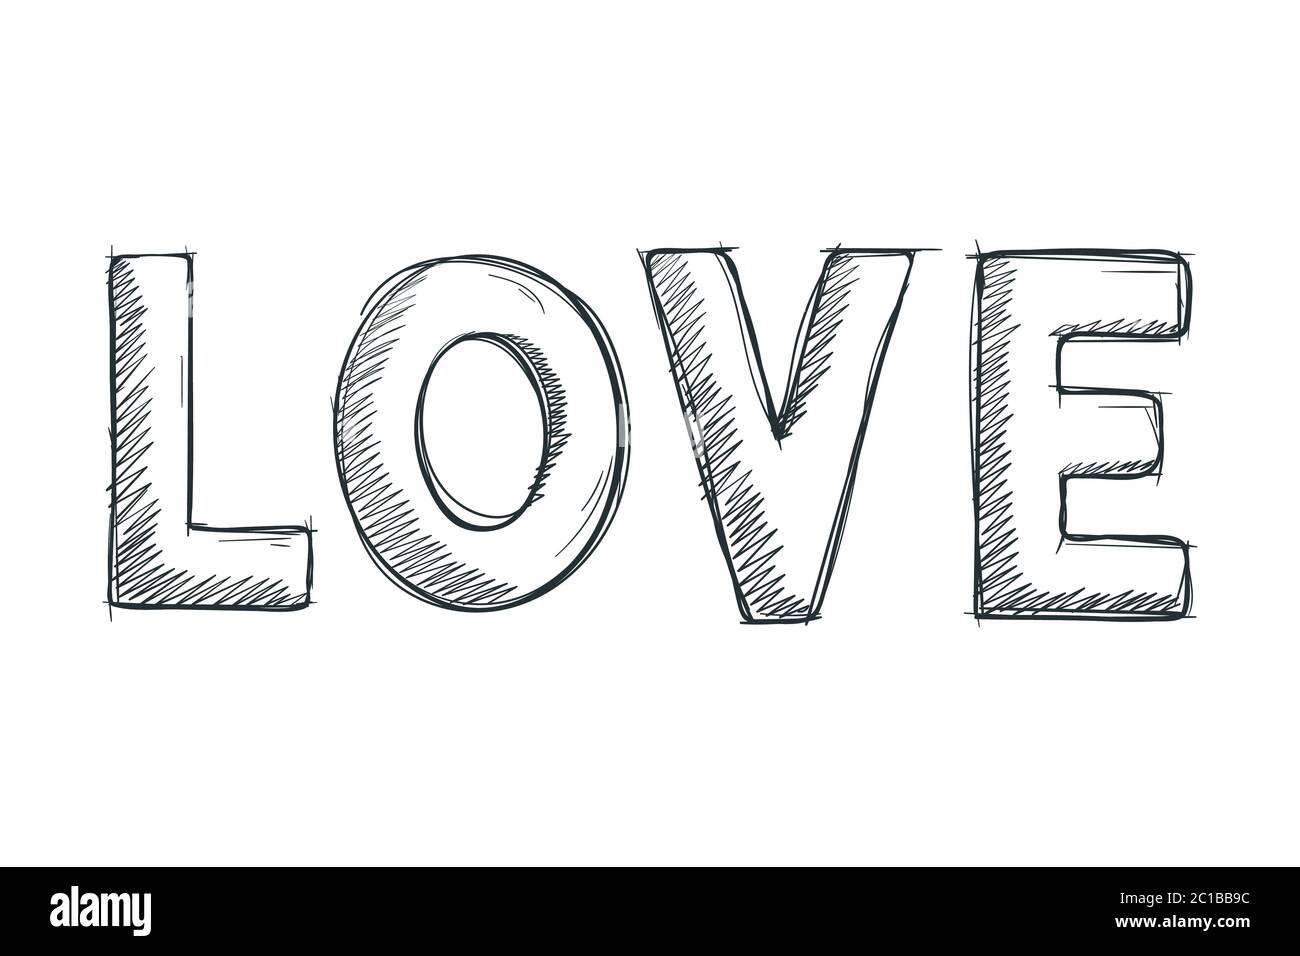 LOVE text hand drawn sketch. Pencil drawing style Stock Vector ...